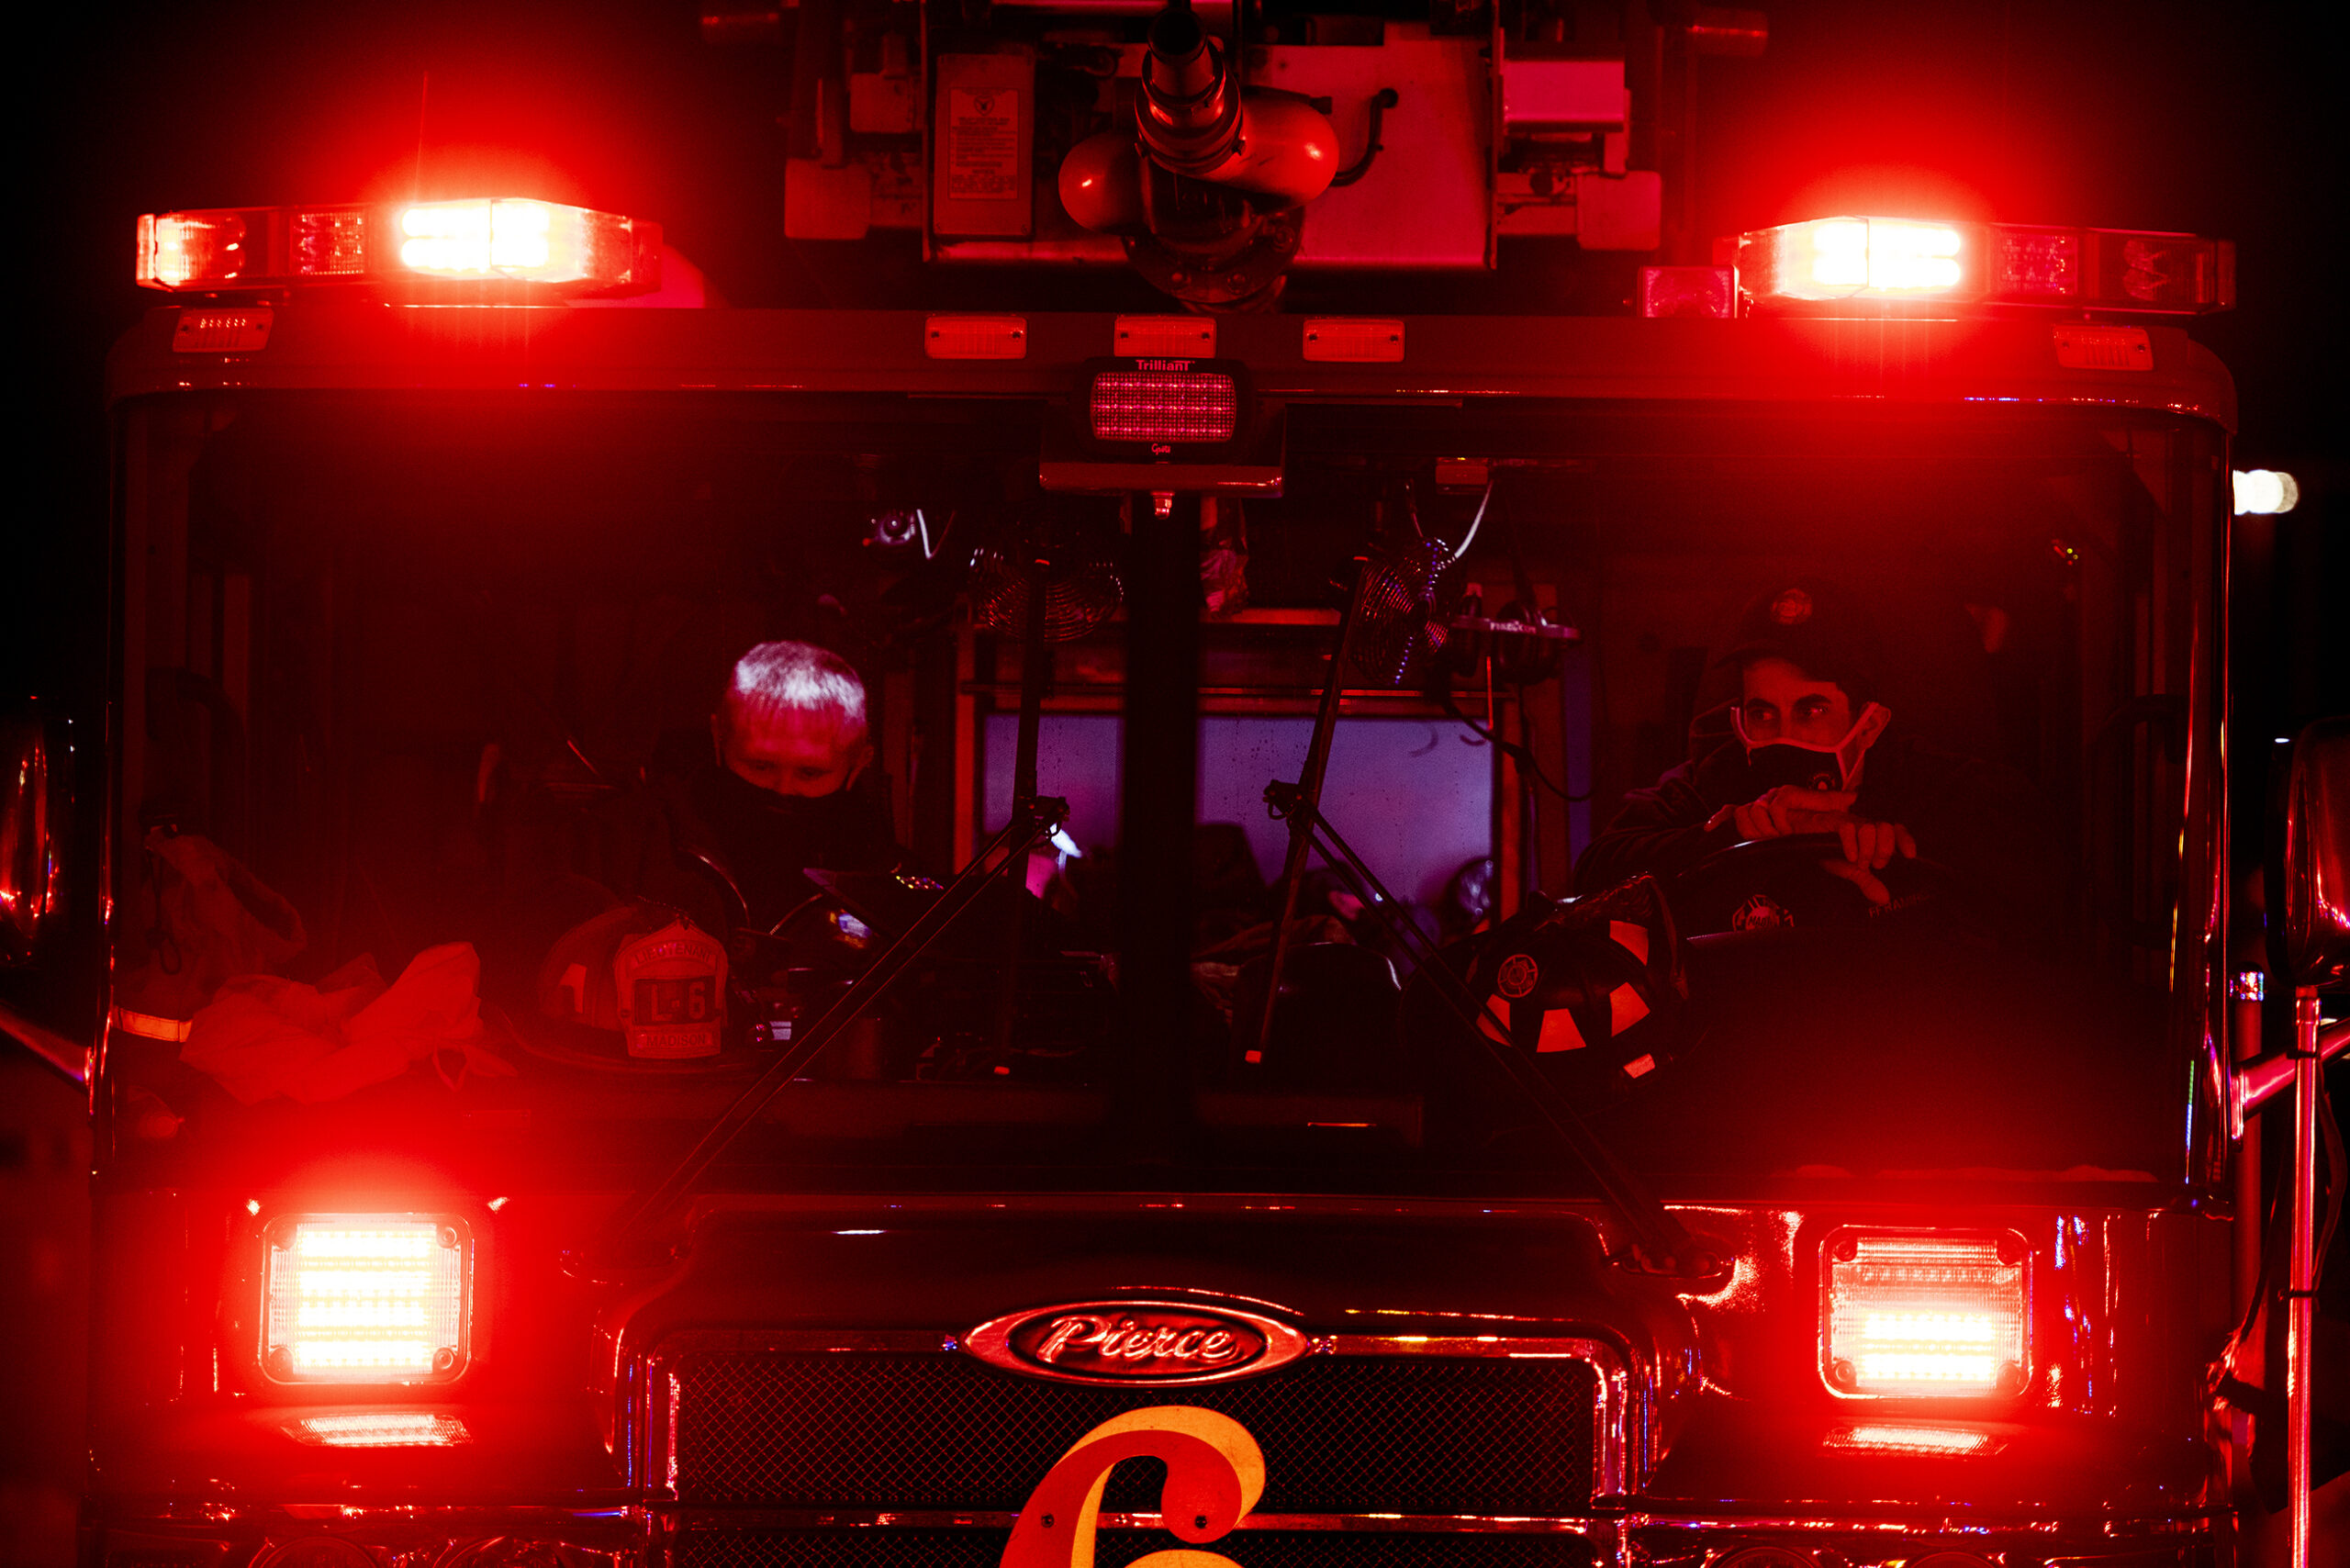 Four bright red lights glow into the night from a firetruck where firefighters are sitting.